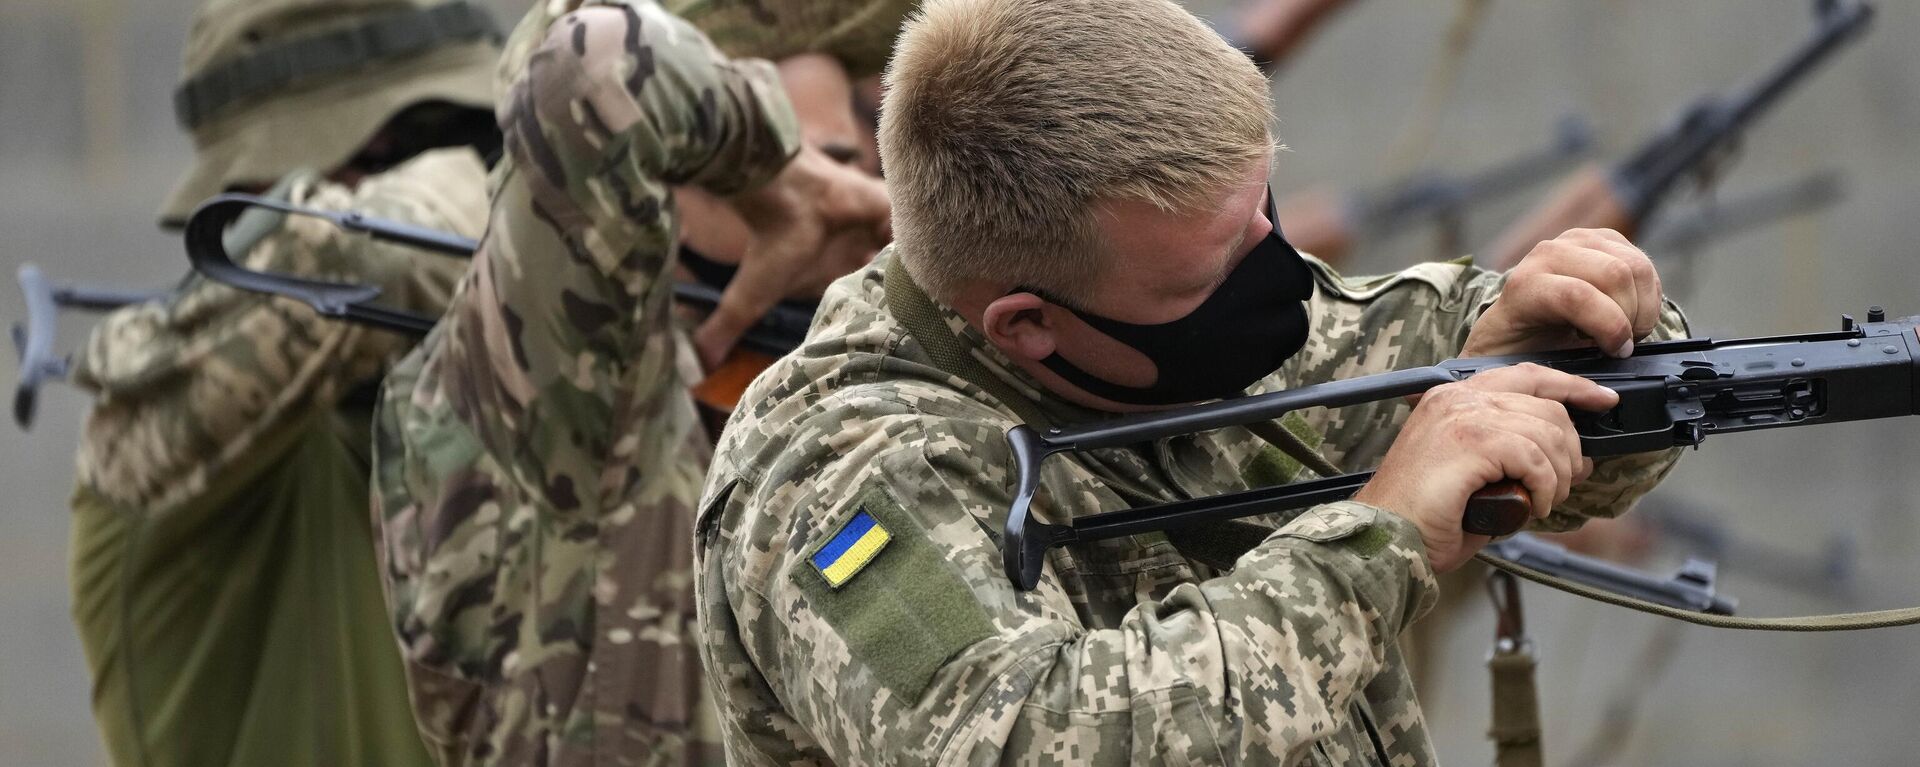 Ukrainian volunteer military recruits take part in an urban battle exercise whilst being trained by British Armed Forces at a military base in Southern England, Monday, Aug. 15, 2022 - Sputnik International, 1920, 13.03.2024